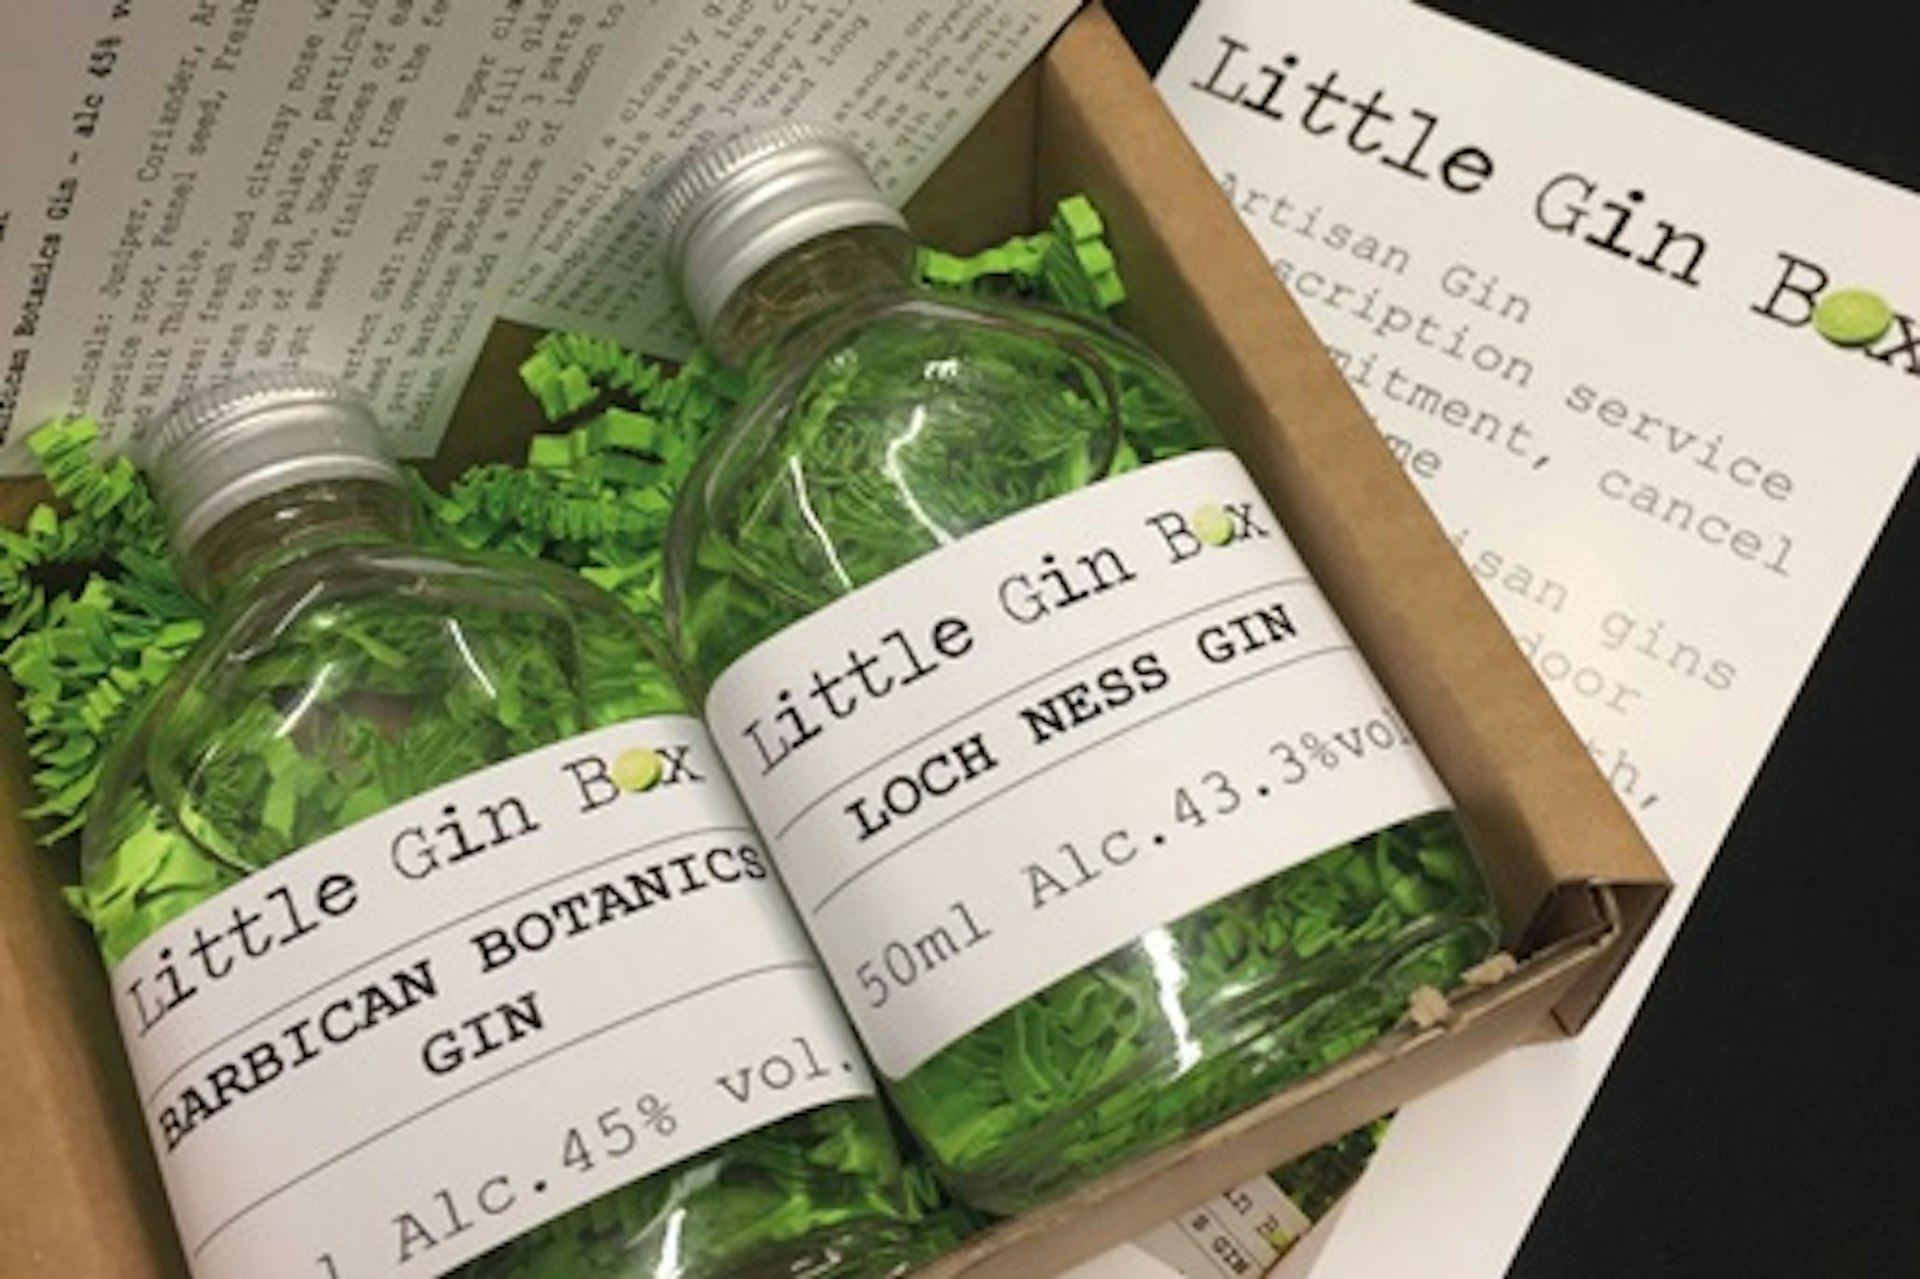 Three Months Gin Subscription with Little Gin Box 2